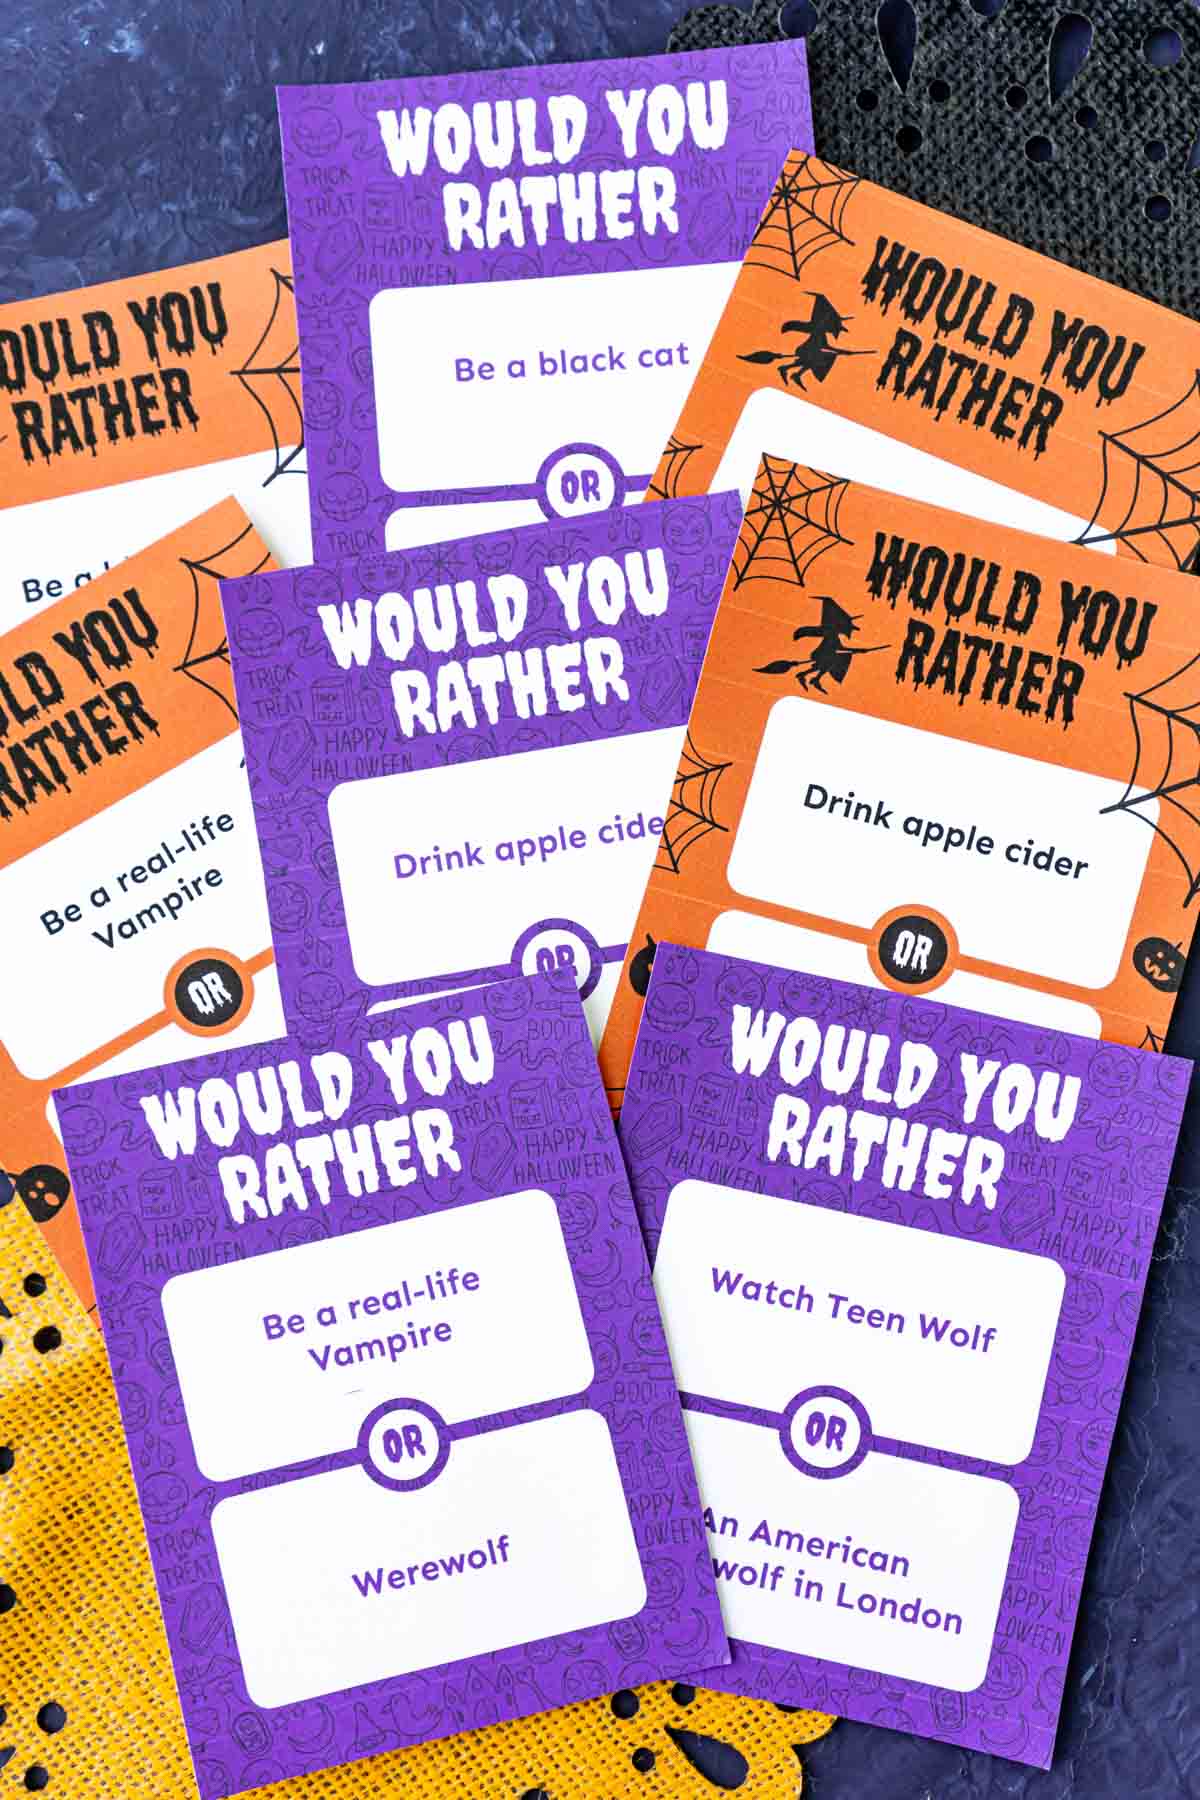 Would You Rather Questions for Kids